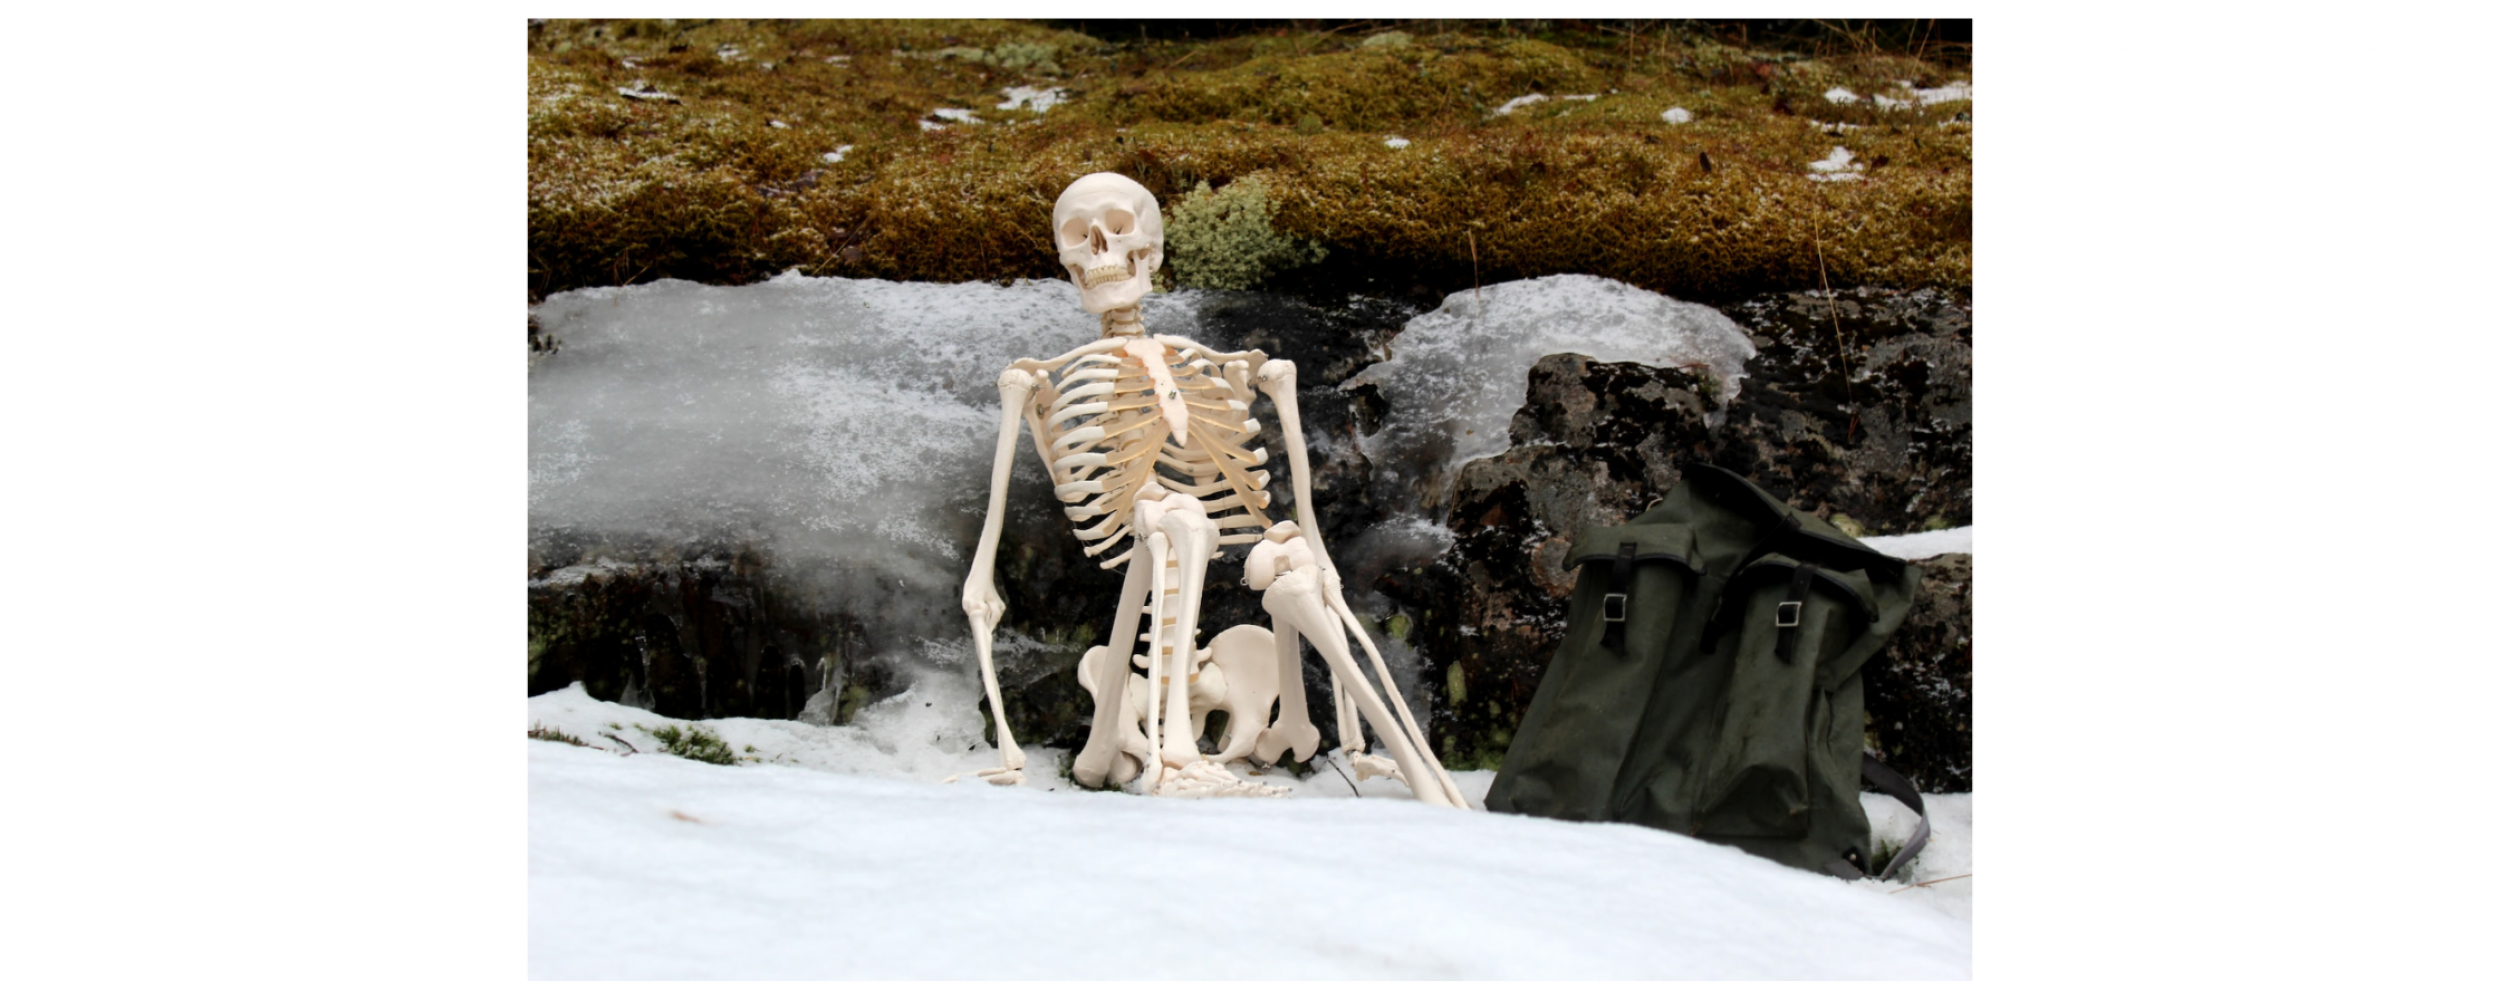 Human skeleton sitting on snow-covered ground next to their backpack enjoying the view on their break from a stroll outdoors